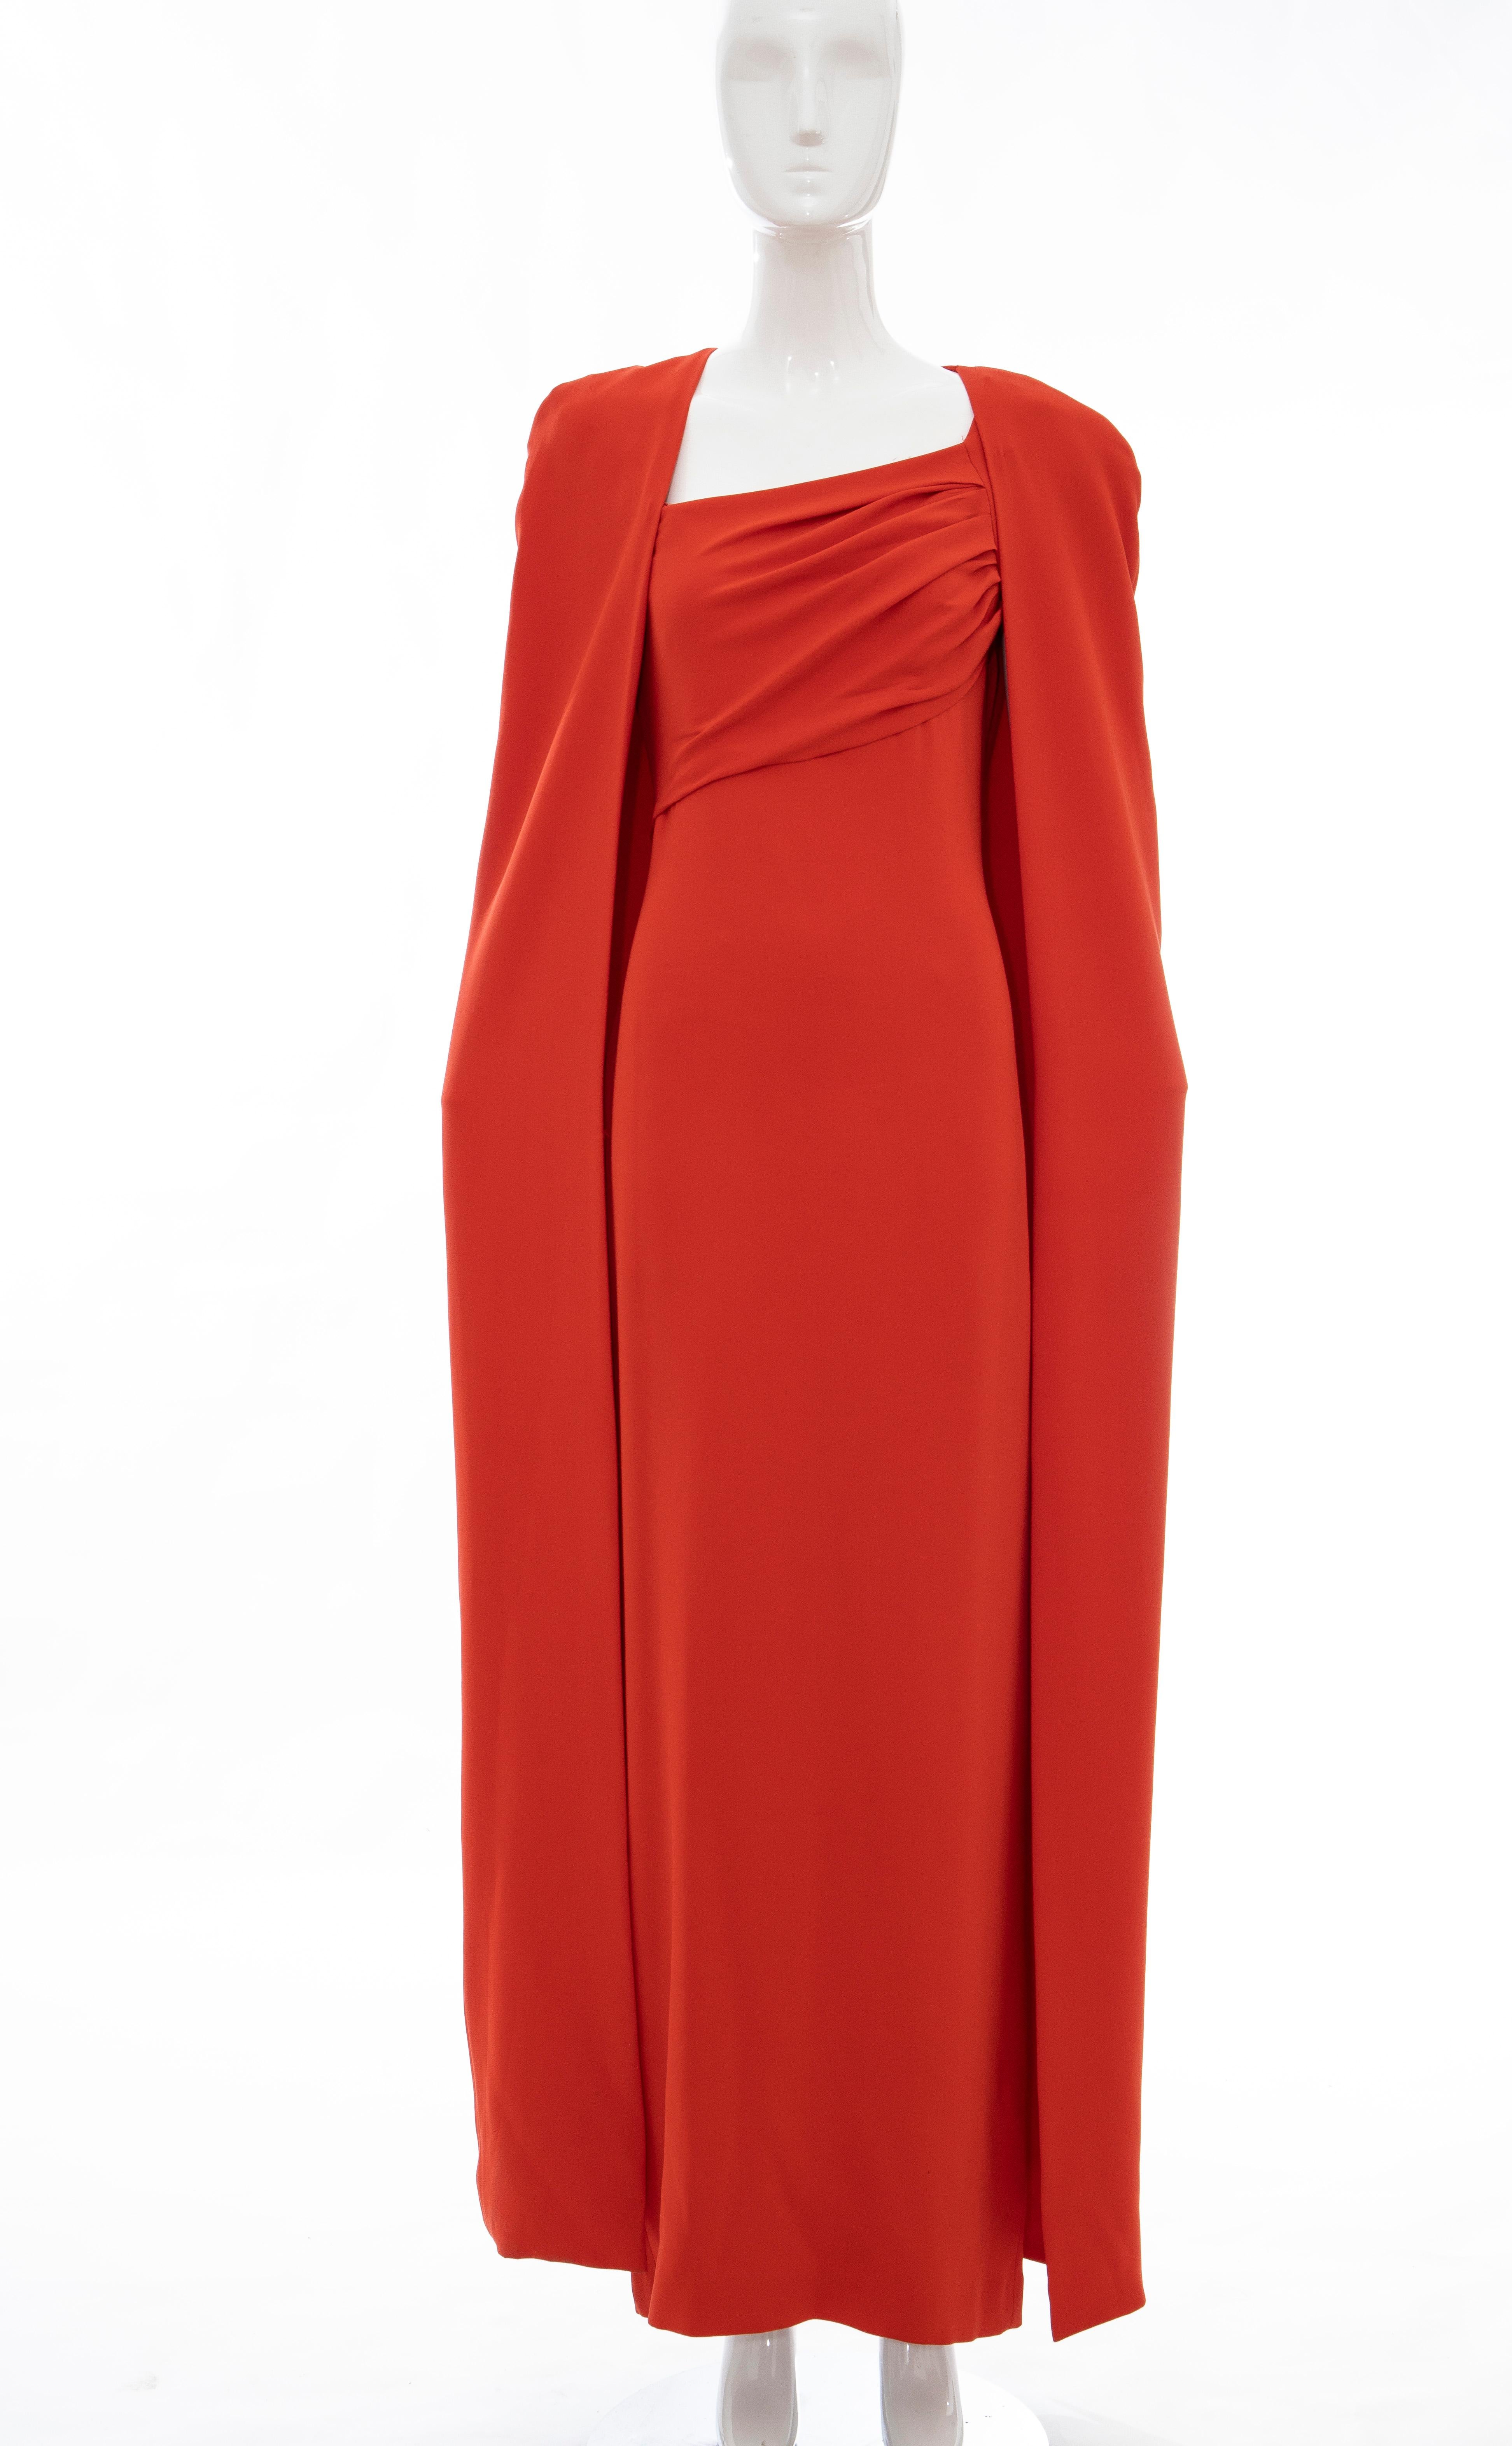 Tom Ford Runway Fall 2012, silk persimmon evening dress ensemble. Cape features tonal stitching throughout, open front and fully lined in silk. Dress features cap sleeves, gathering at bodice, slit at back, concealed back zip closure and fully lined